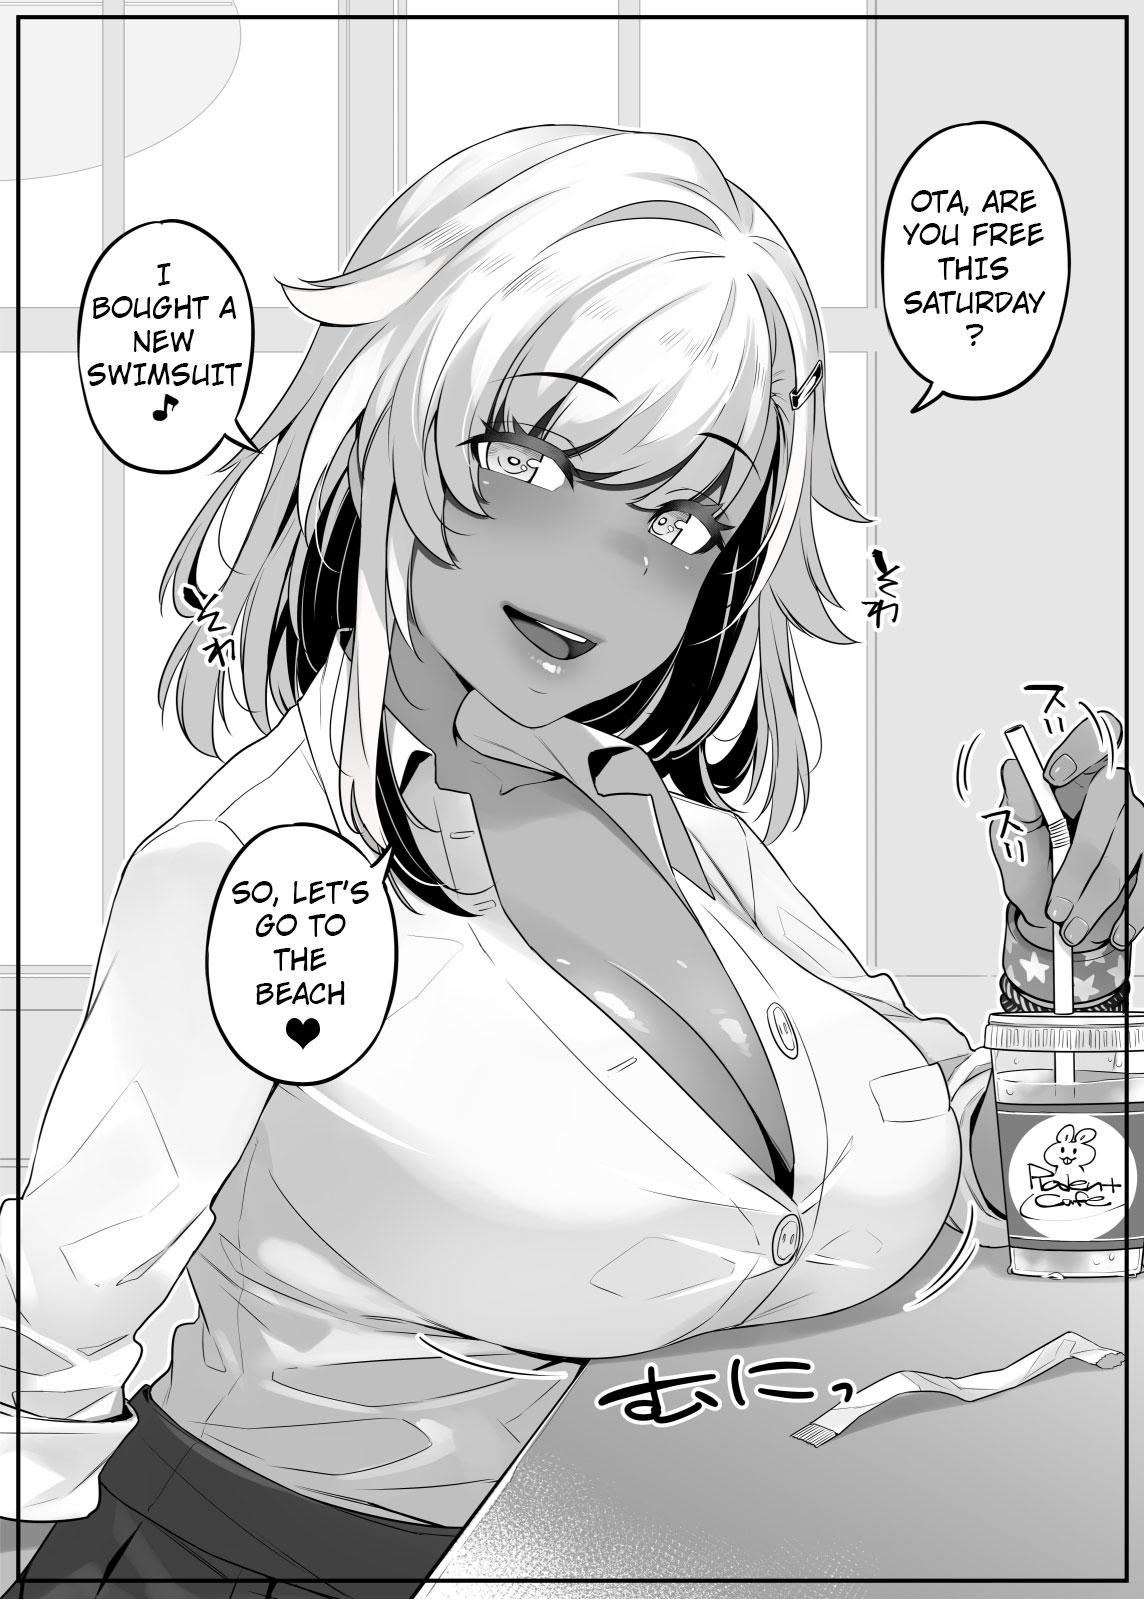 Secretary The story of a brown gal who loves otaku-kun - Original Young Tits - Page 3